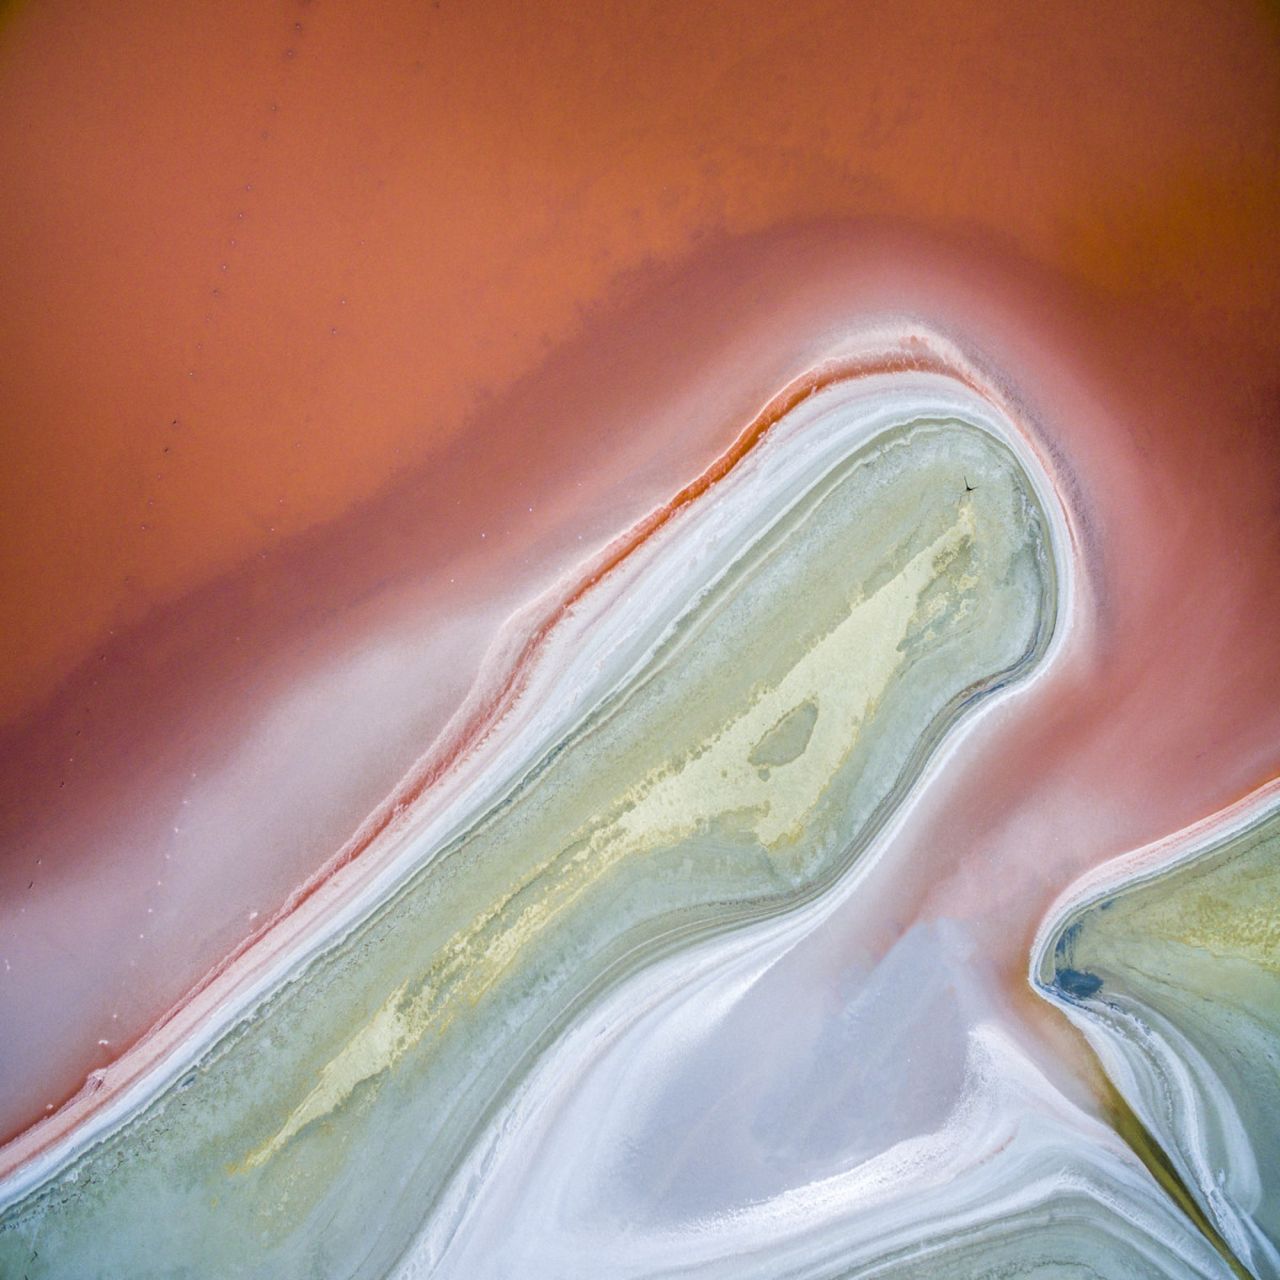 <strong>Red and Green Salt Lake: </strong>This photograph by Michael Pilsworth was one of 12 shortlisted images in the Australia From Above competition, organized by aerial photography community SkyPixel and co-sponsored by Tourism Australia and drone manufacturer DJI. Photographers were asked to showcase new, creative perspectives of landscapes around the country.